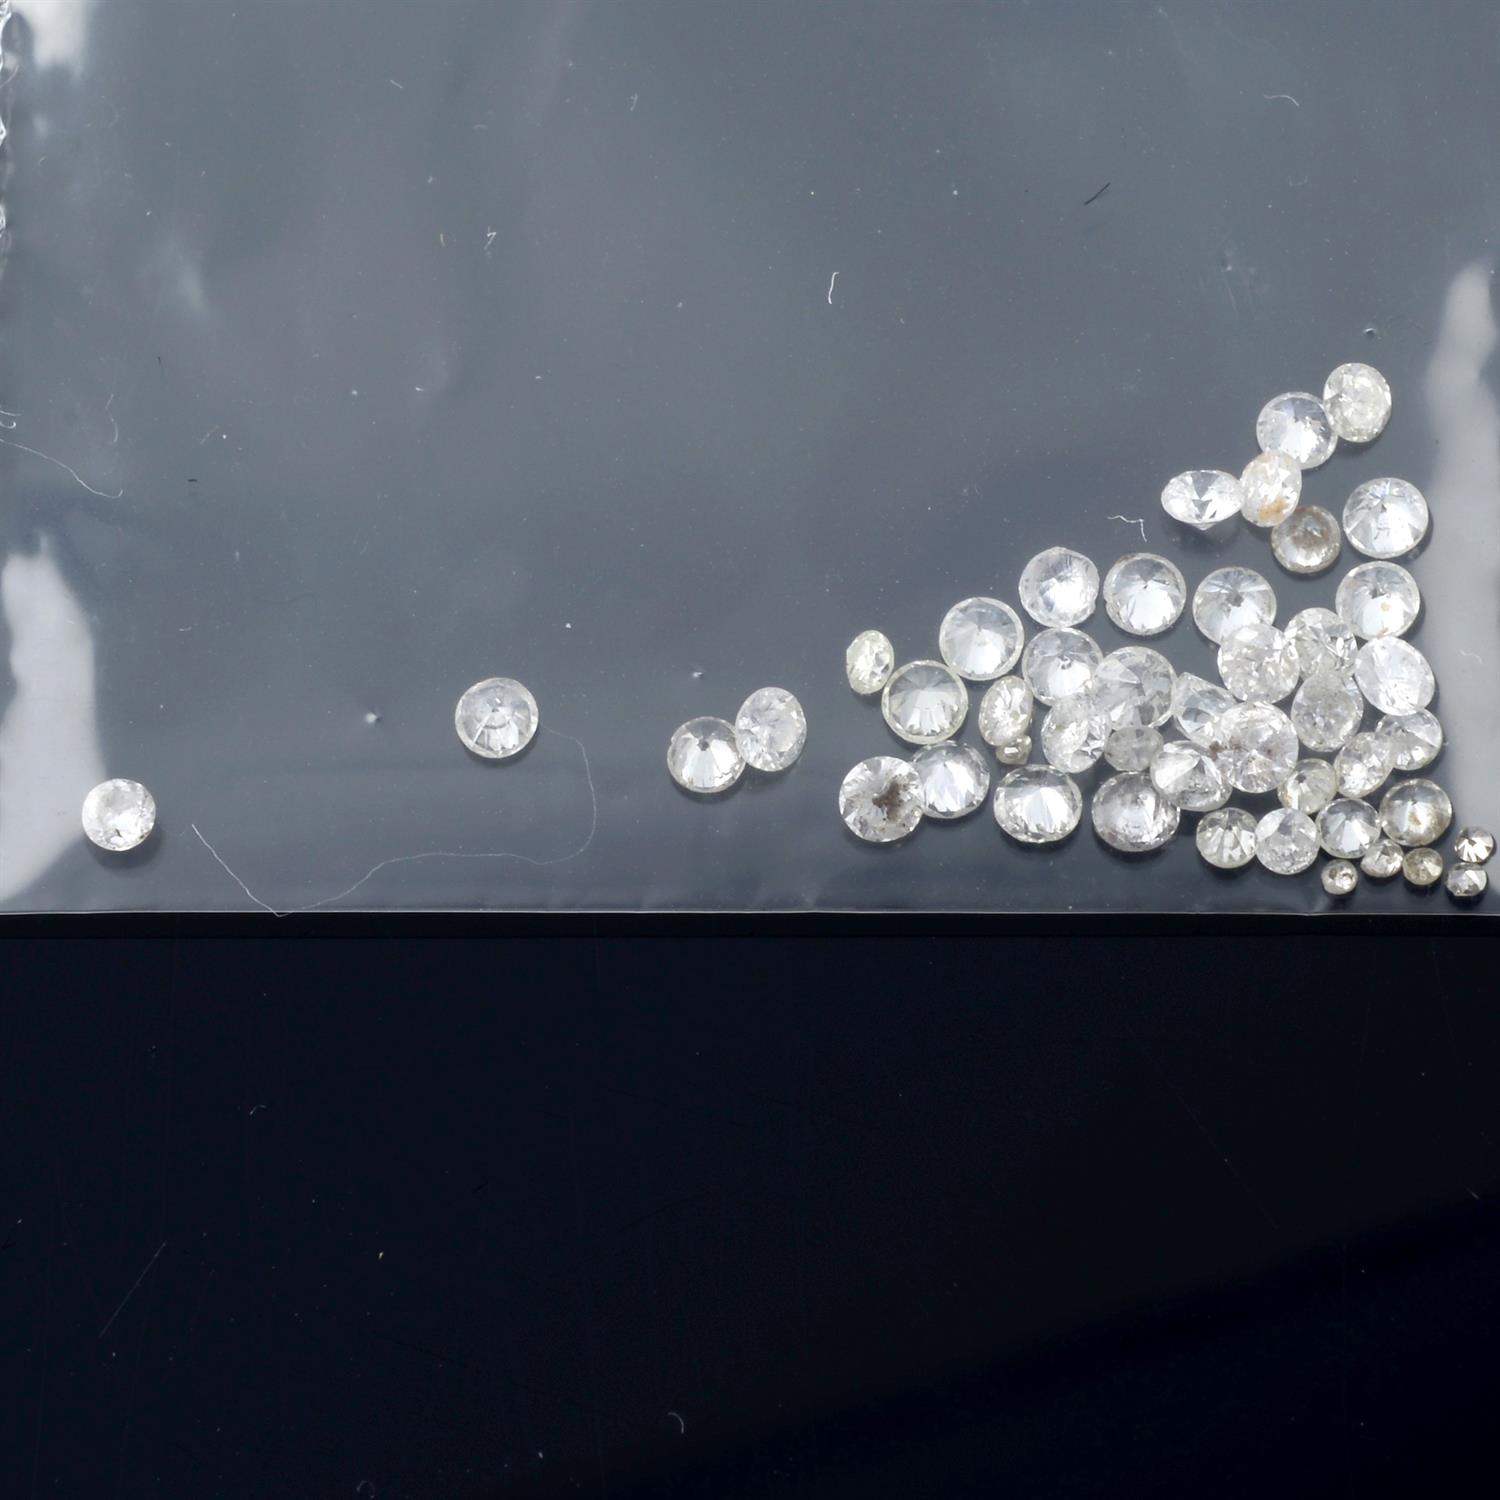 STUART DEVLIN STOCK - Selection of brilliant cut diamonds, weighing 1.45ct - Image 2 of 2